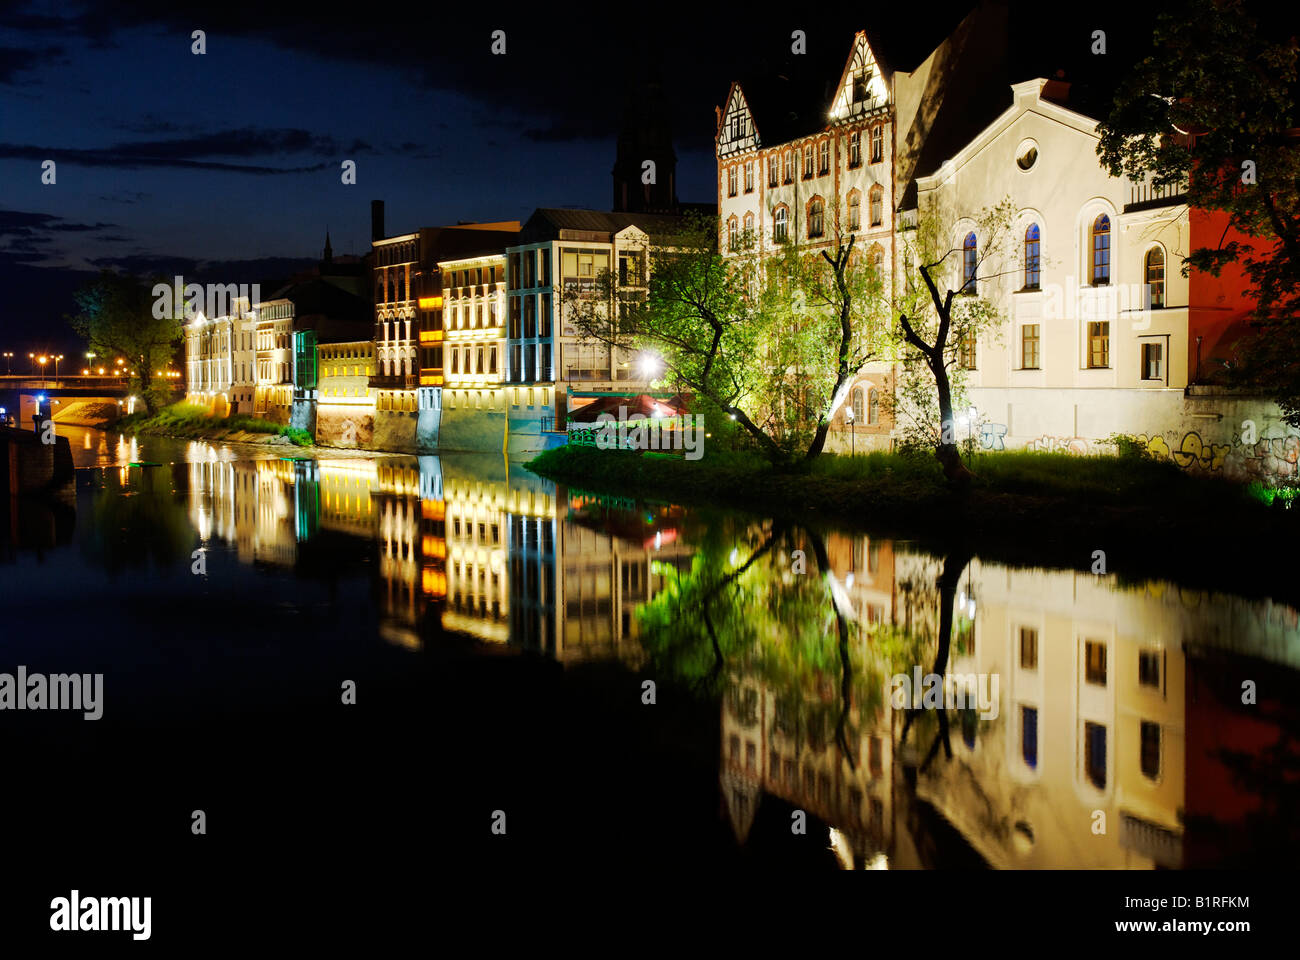 Facades, lit up, on the River Oder in Opole, Silesia, Poland, Europe Stock Photo